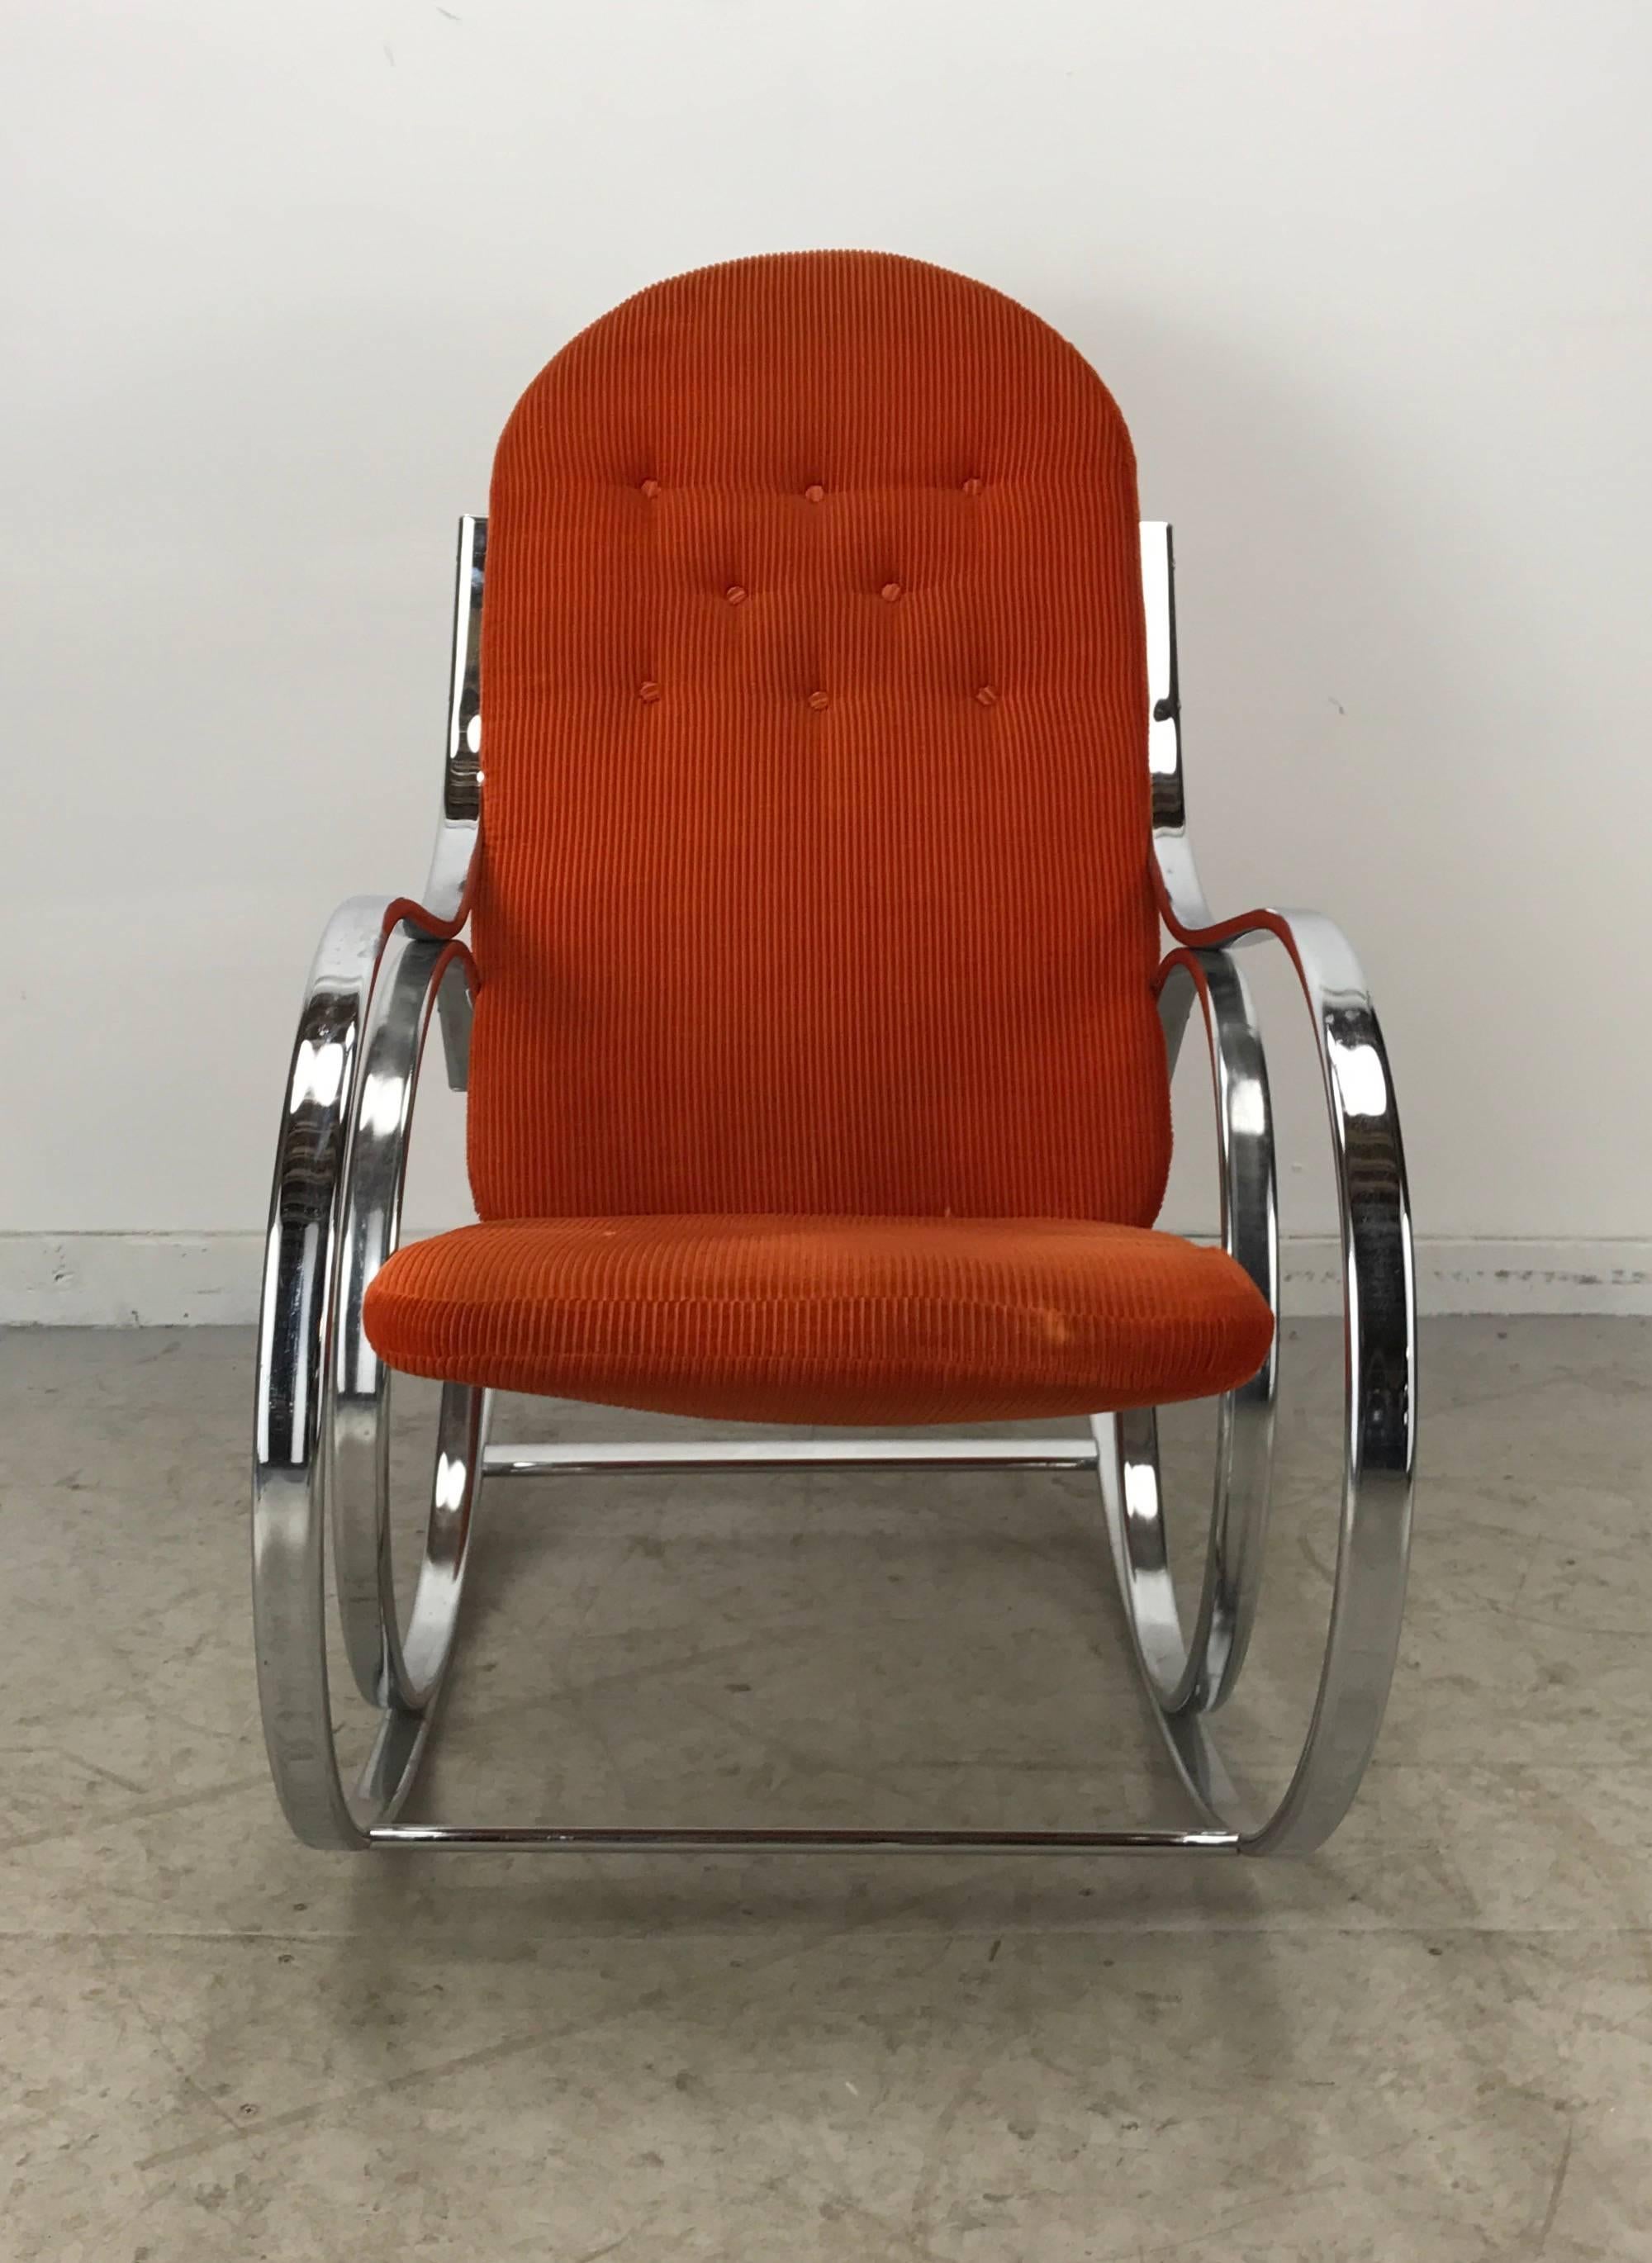 Mid-Century, 1970s rocking chair, chromed Thonet style steel curved frame and button tuft seat and back. Retains original orange cotton fabric, stylish and comfortable,.